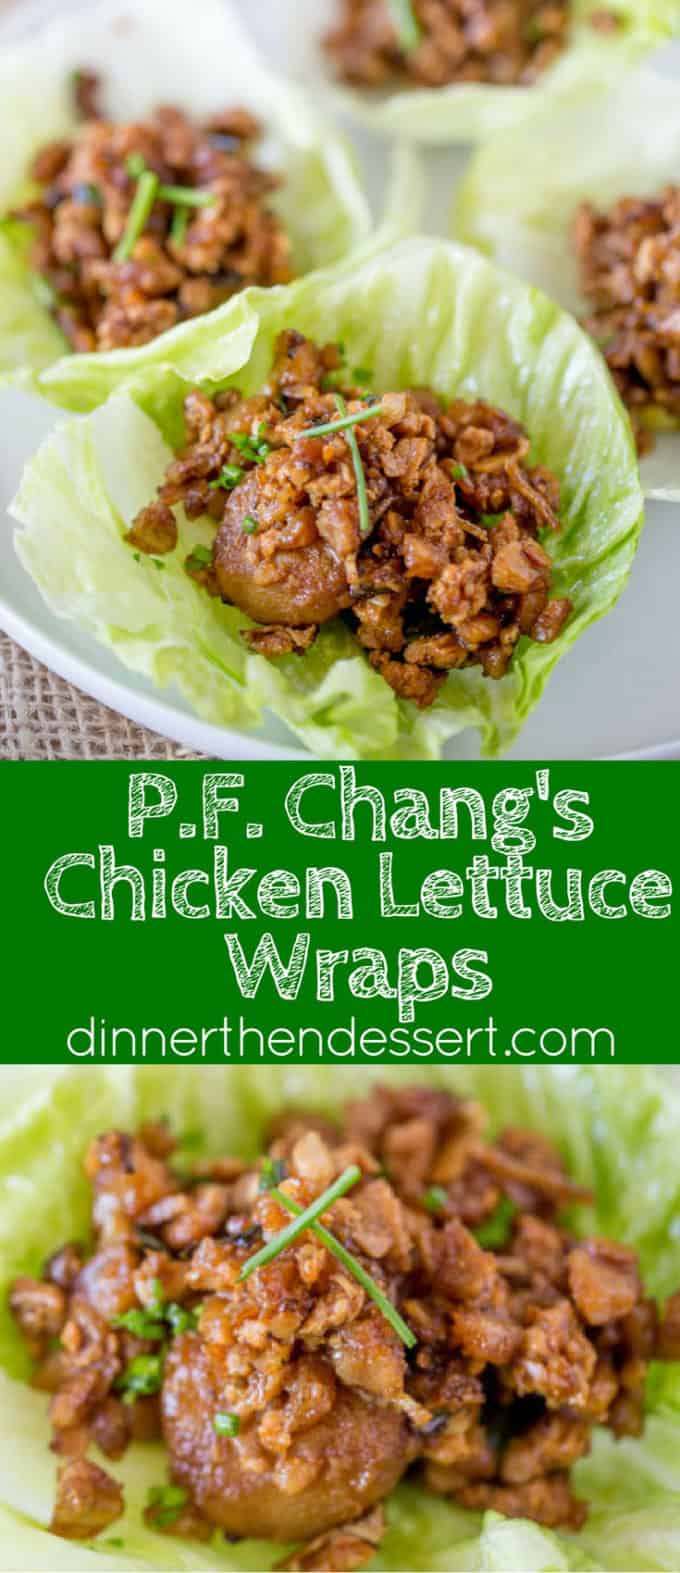 P.F. Chang's Chicken Lettuce Wraps is the most popular item on the menu for good reason with chicken, chestnuts and a delicious sauce, they're healthy and addicting!